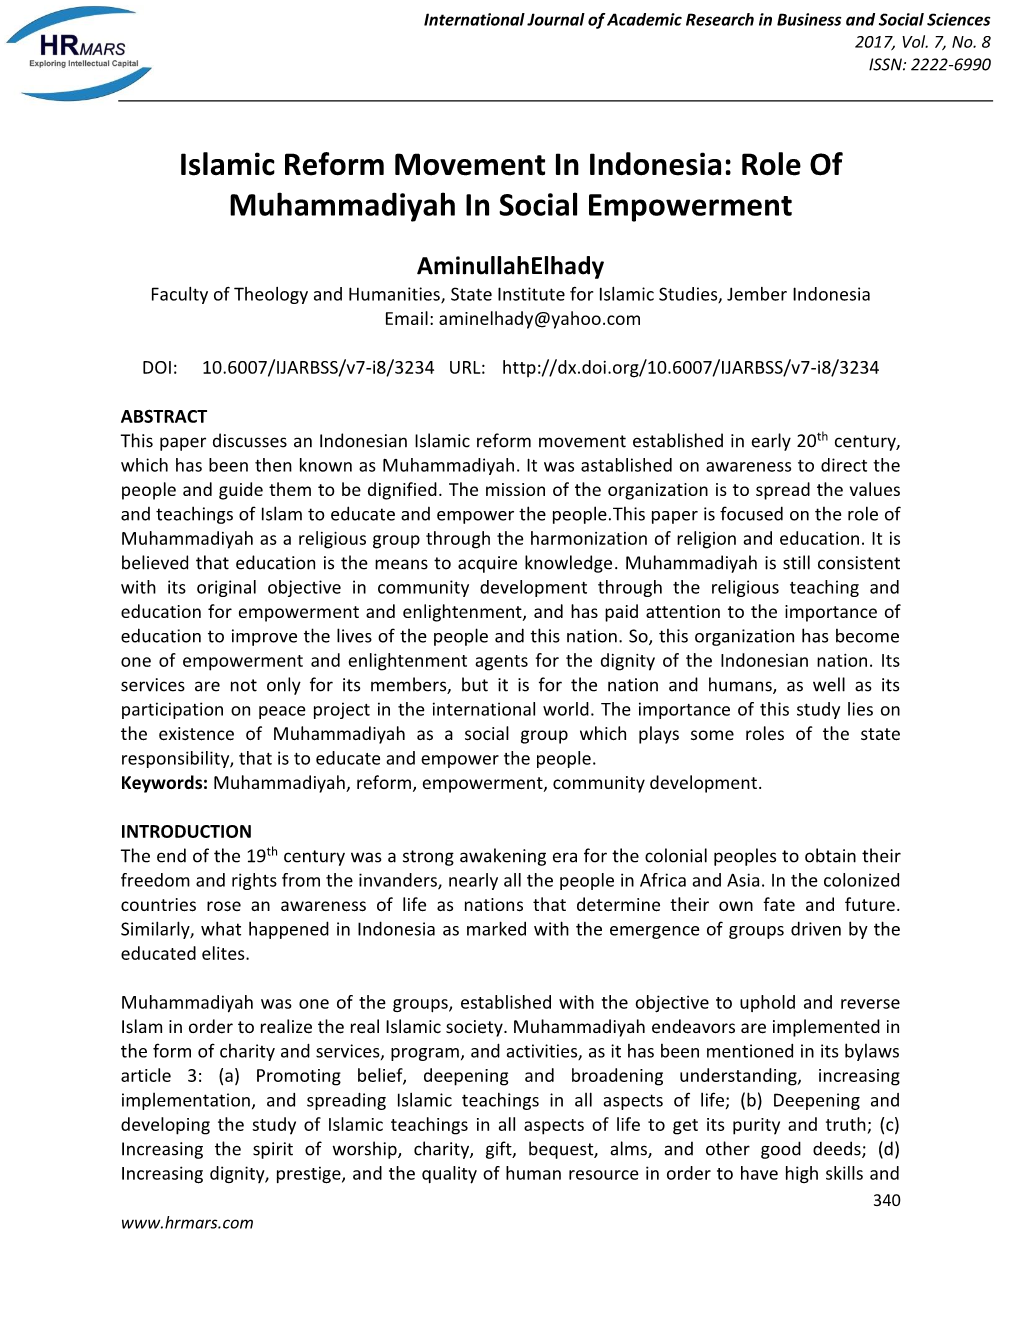 Islamic Reform Movement in Indonesia: Role of Muhammadiyah in Social Empowerment